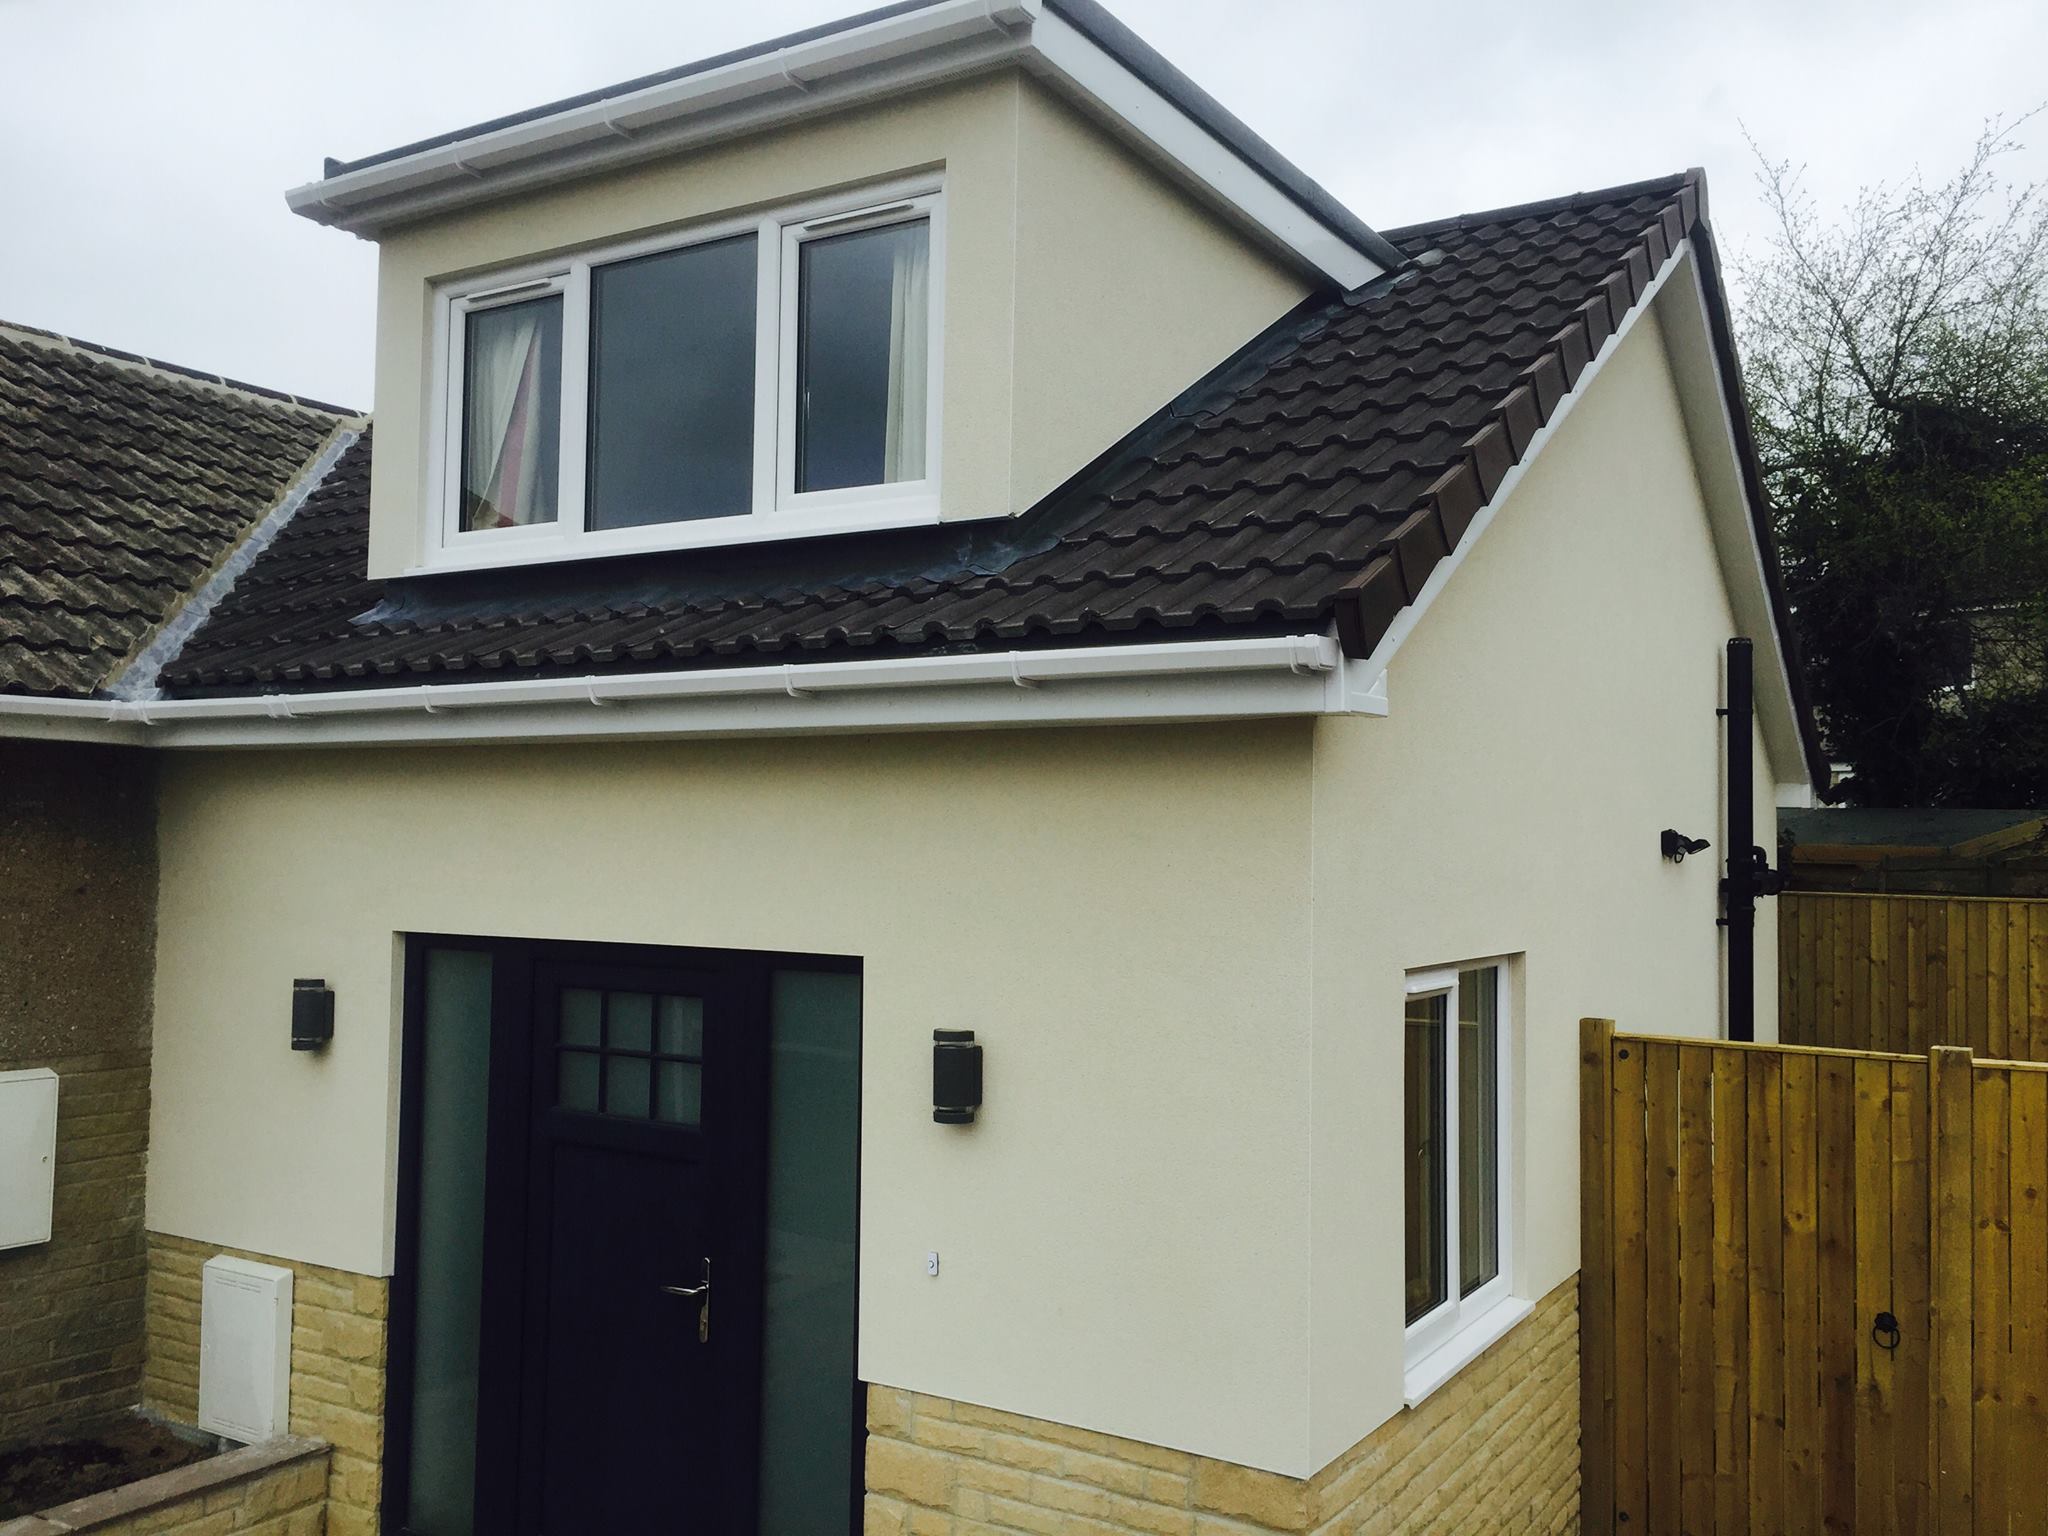 a 2 storey extension on a bungalow - Ridley Building Limited - Ridley